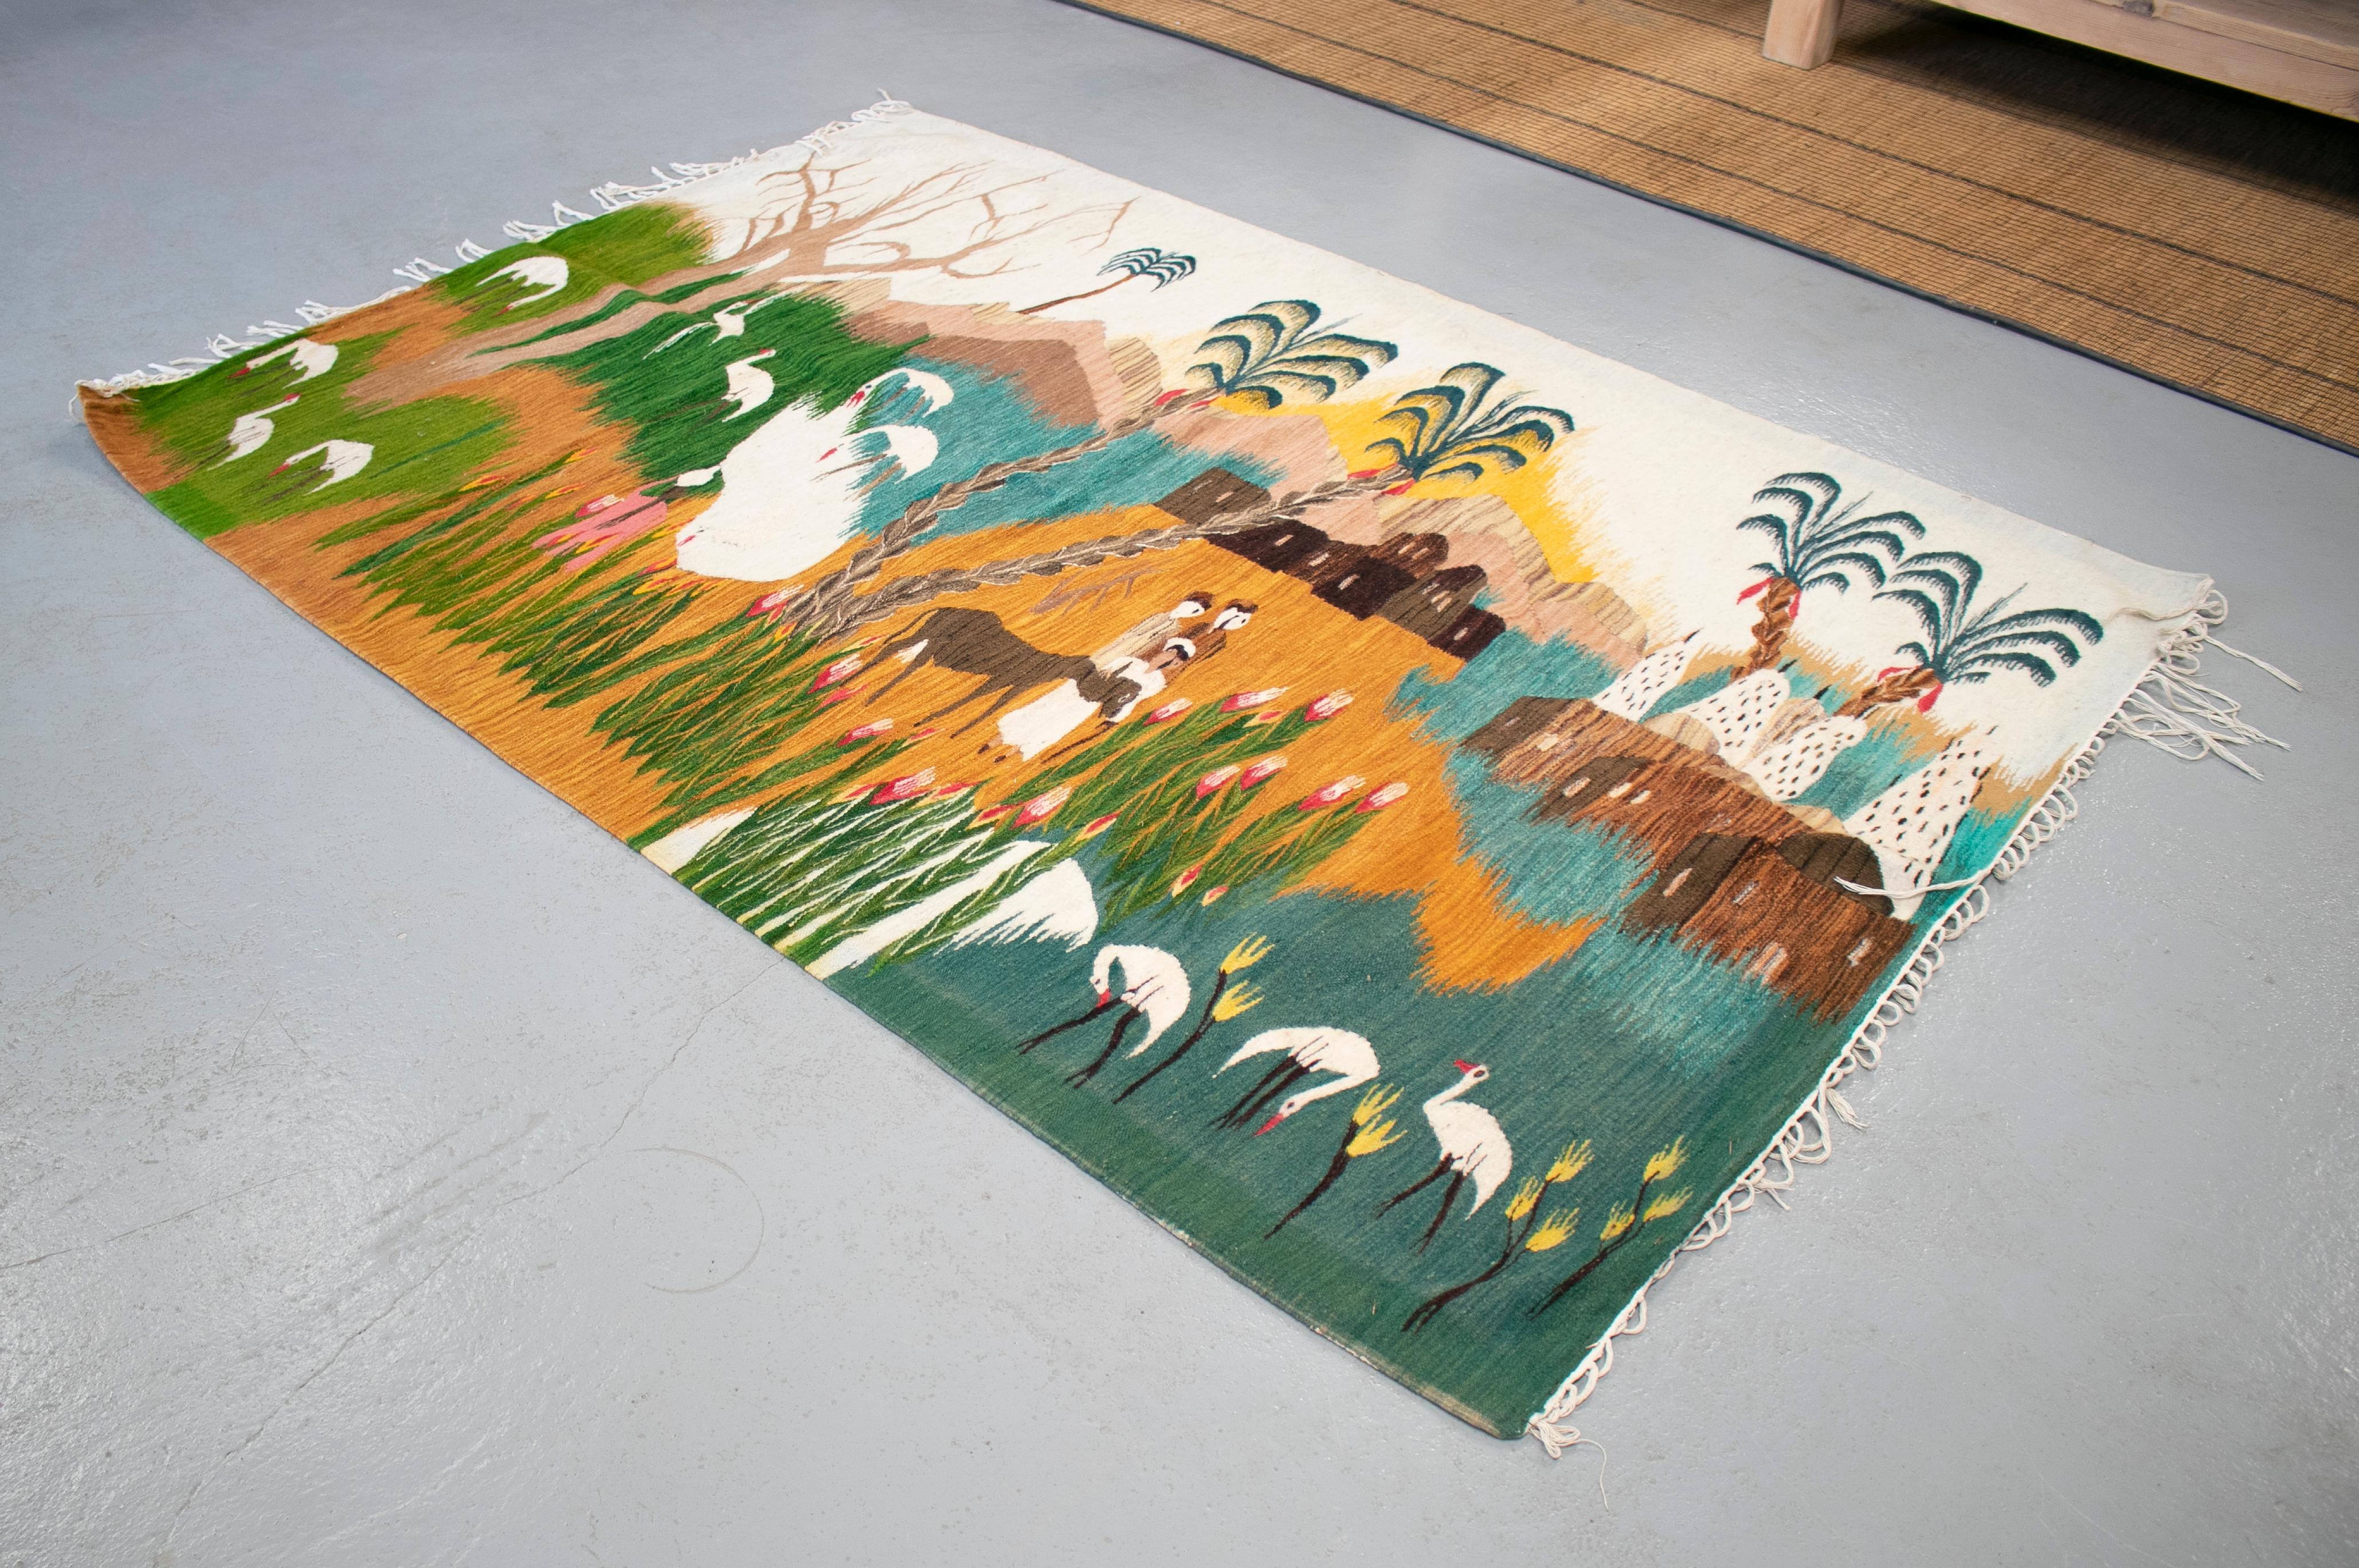 1930s handmade tapestry representing a Nile nature scene with animals, palm trees and a farming village.

Part of a set of Tapestries that represent Egyptian life in the 1930s.